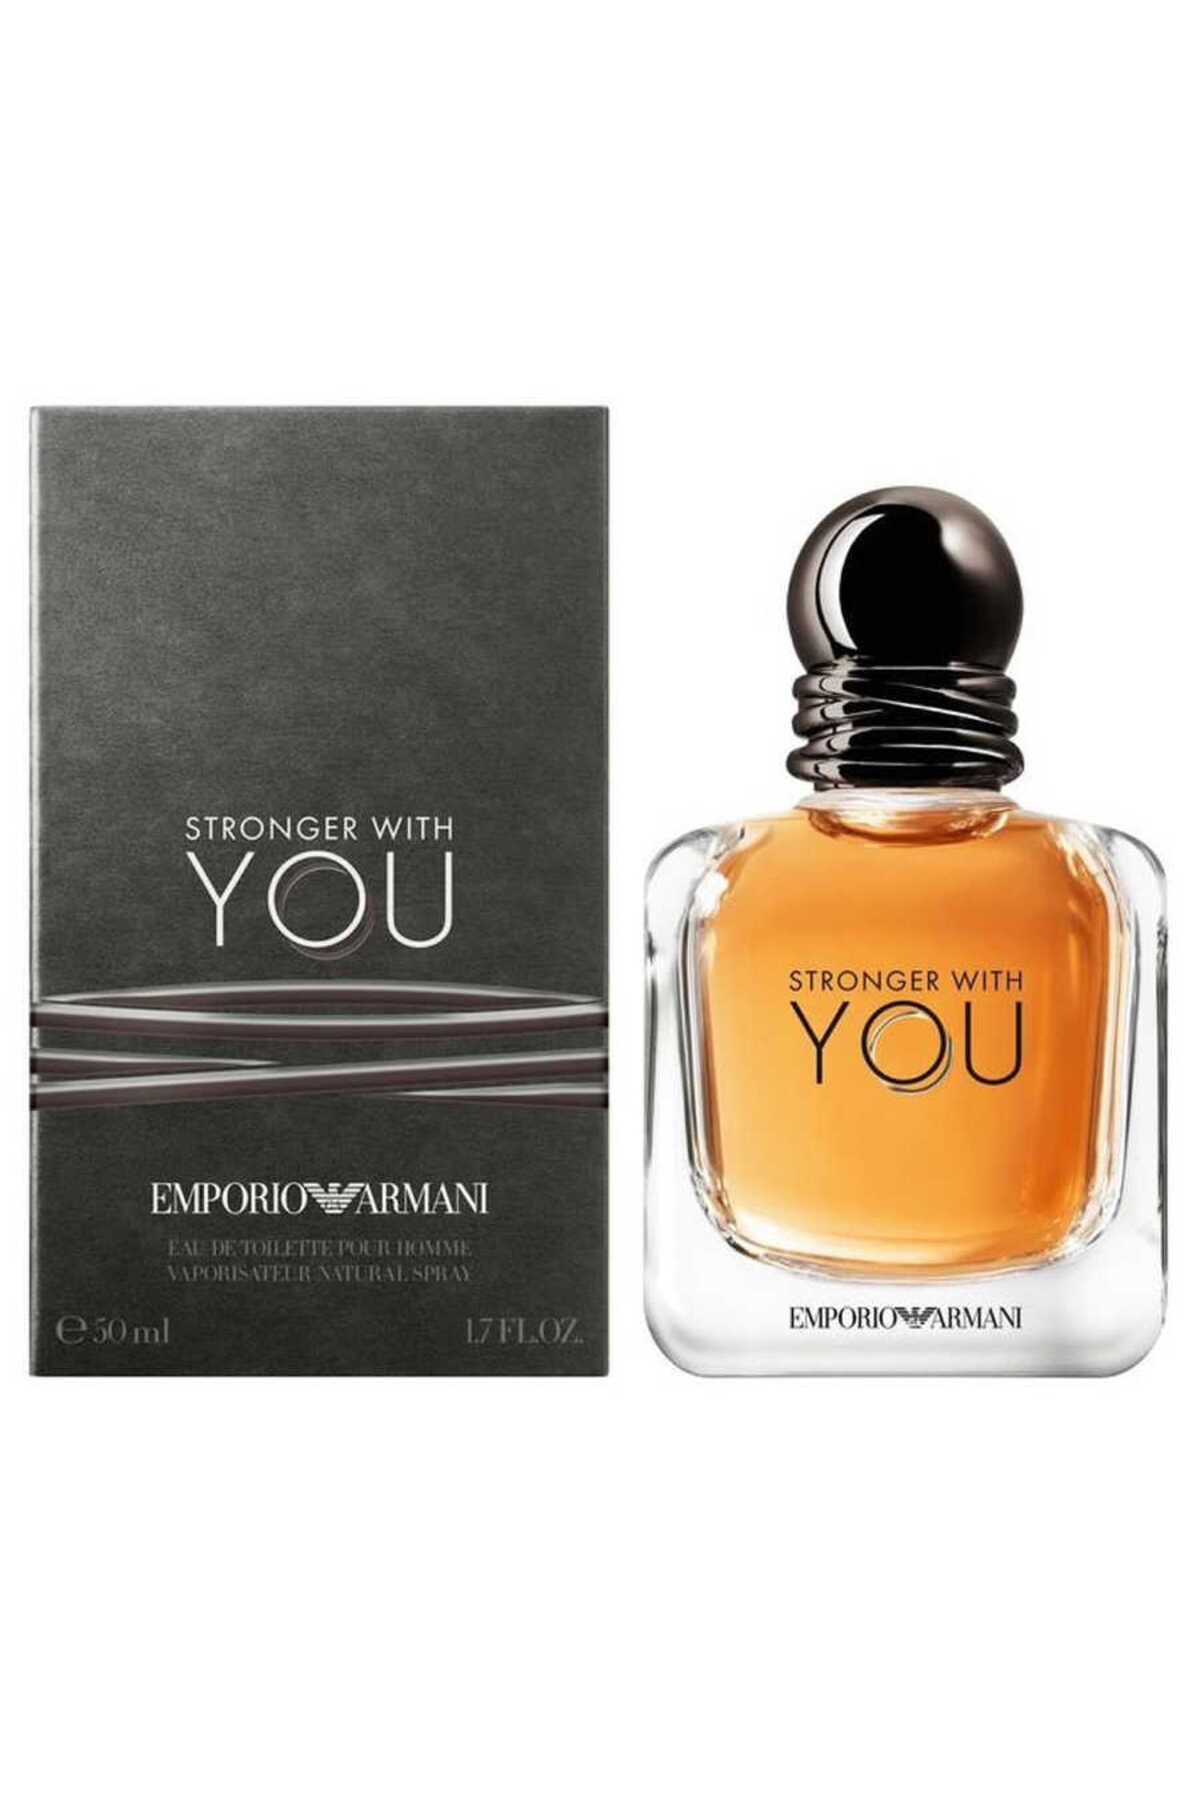 Туалетная вода strong. Emporio Armani stronger with you intensely 100 мл. Туалетная вода Armani Emporio Armani stronger with you. Giorgio Armani Emporio Armani stronger with you. Giorgio Armani stronger with you intensely.